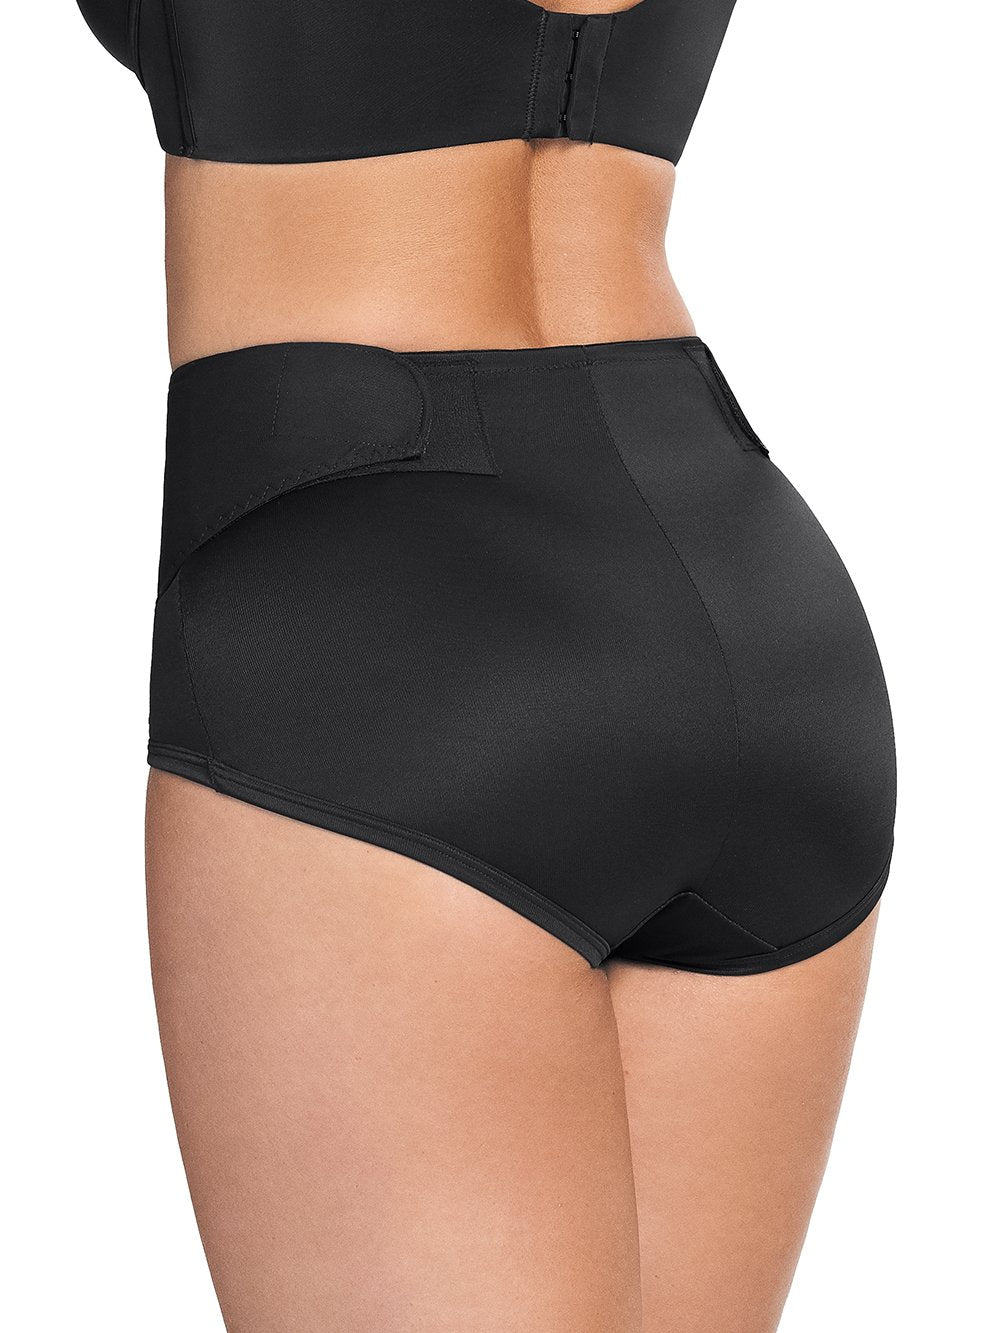 Postpartum Shapewear Panty with Adjustable Belly Wrap - HauteFlair